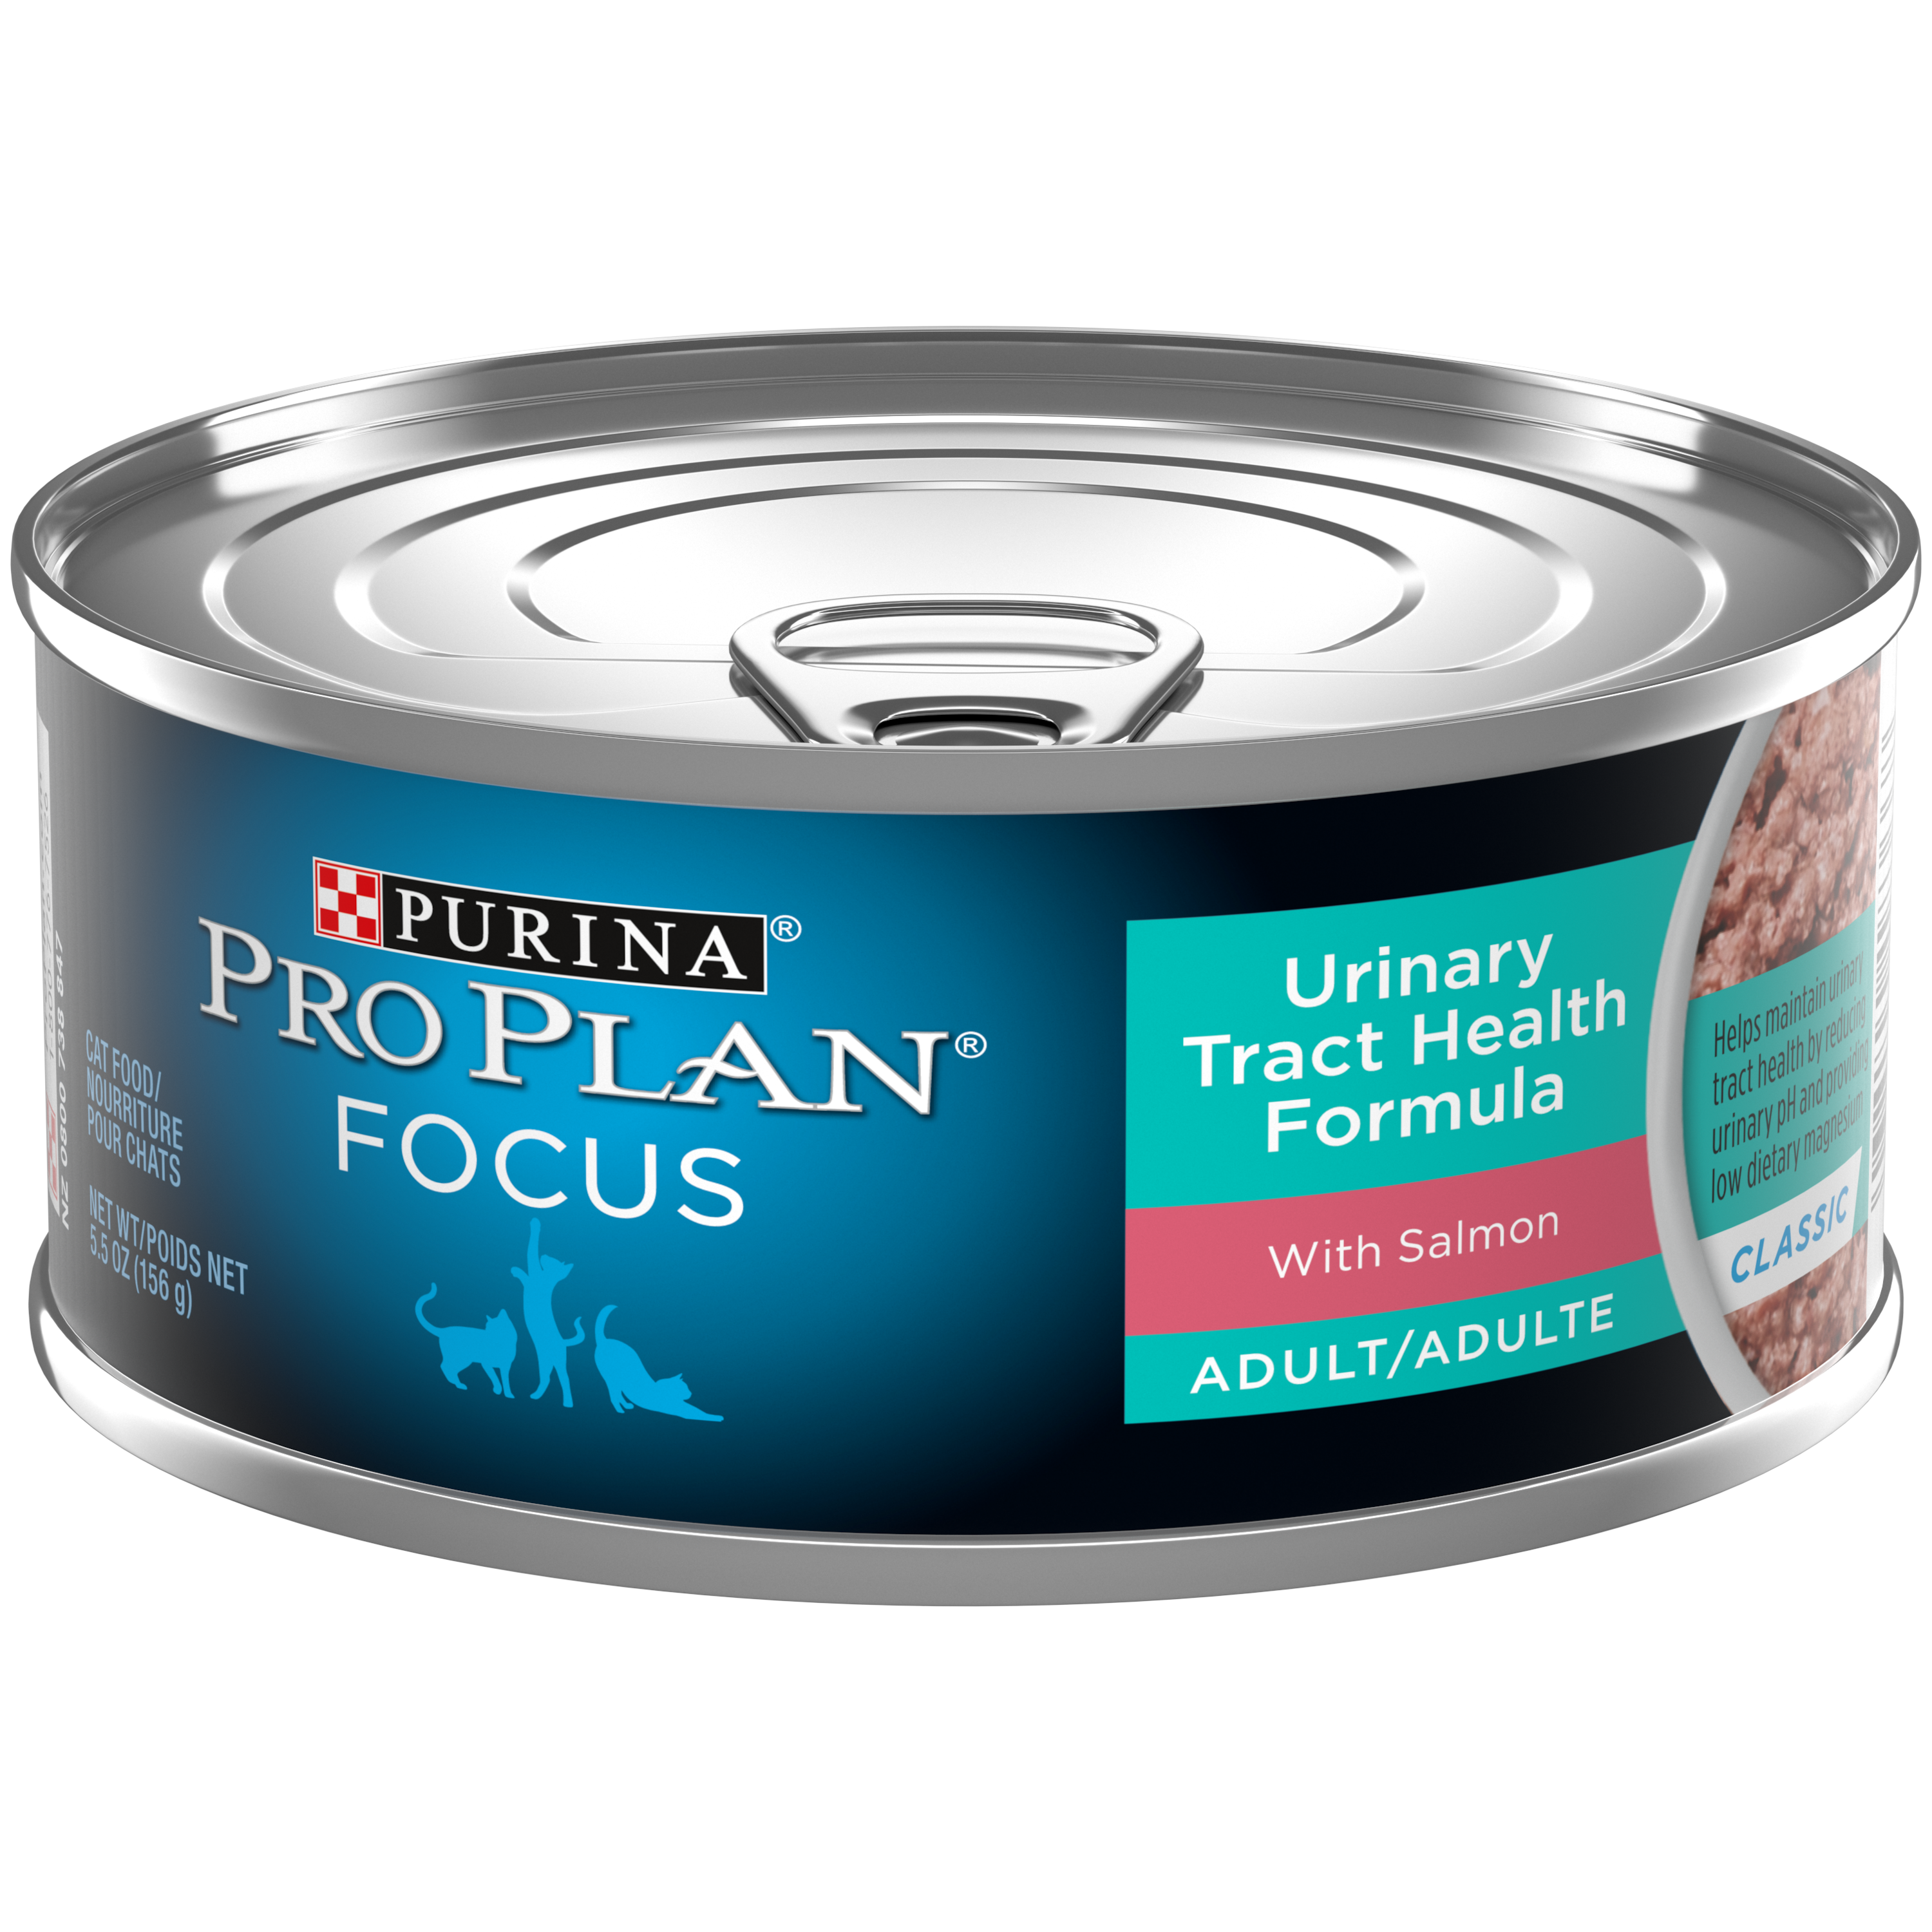 (24 Pack) Purina Pro Plan Focus Adult Urinary Tract Health Formula with ...